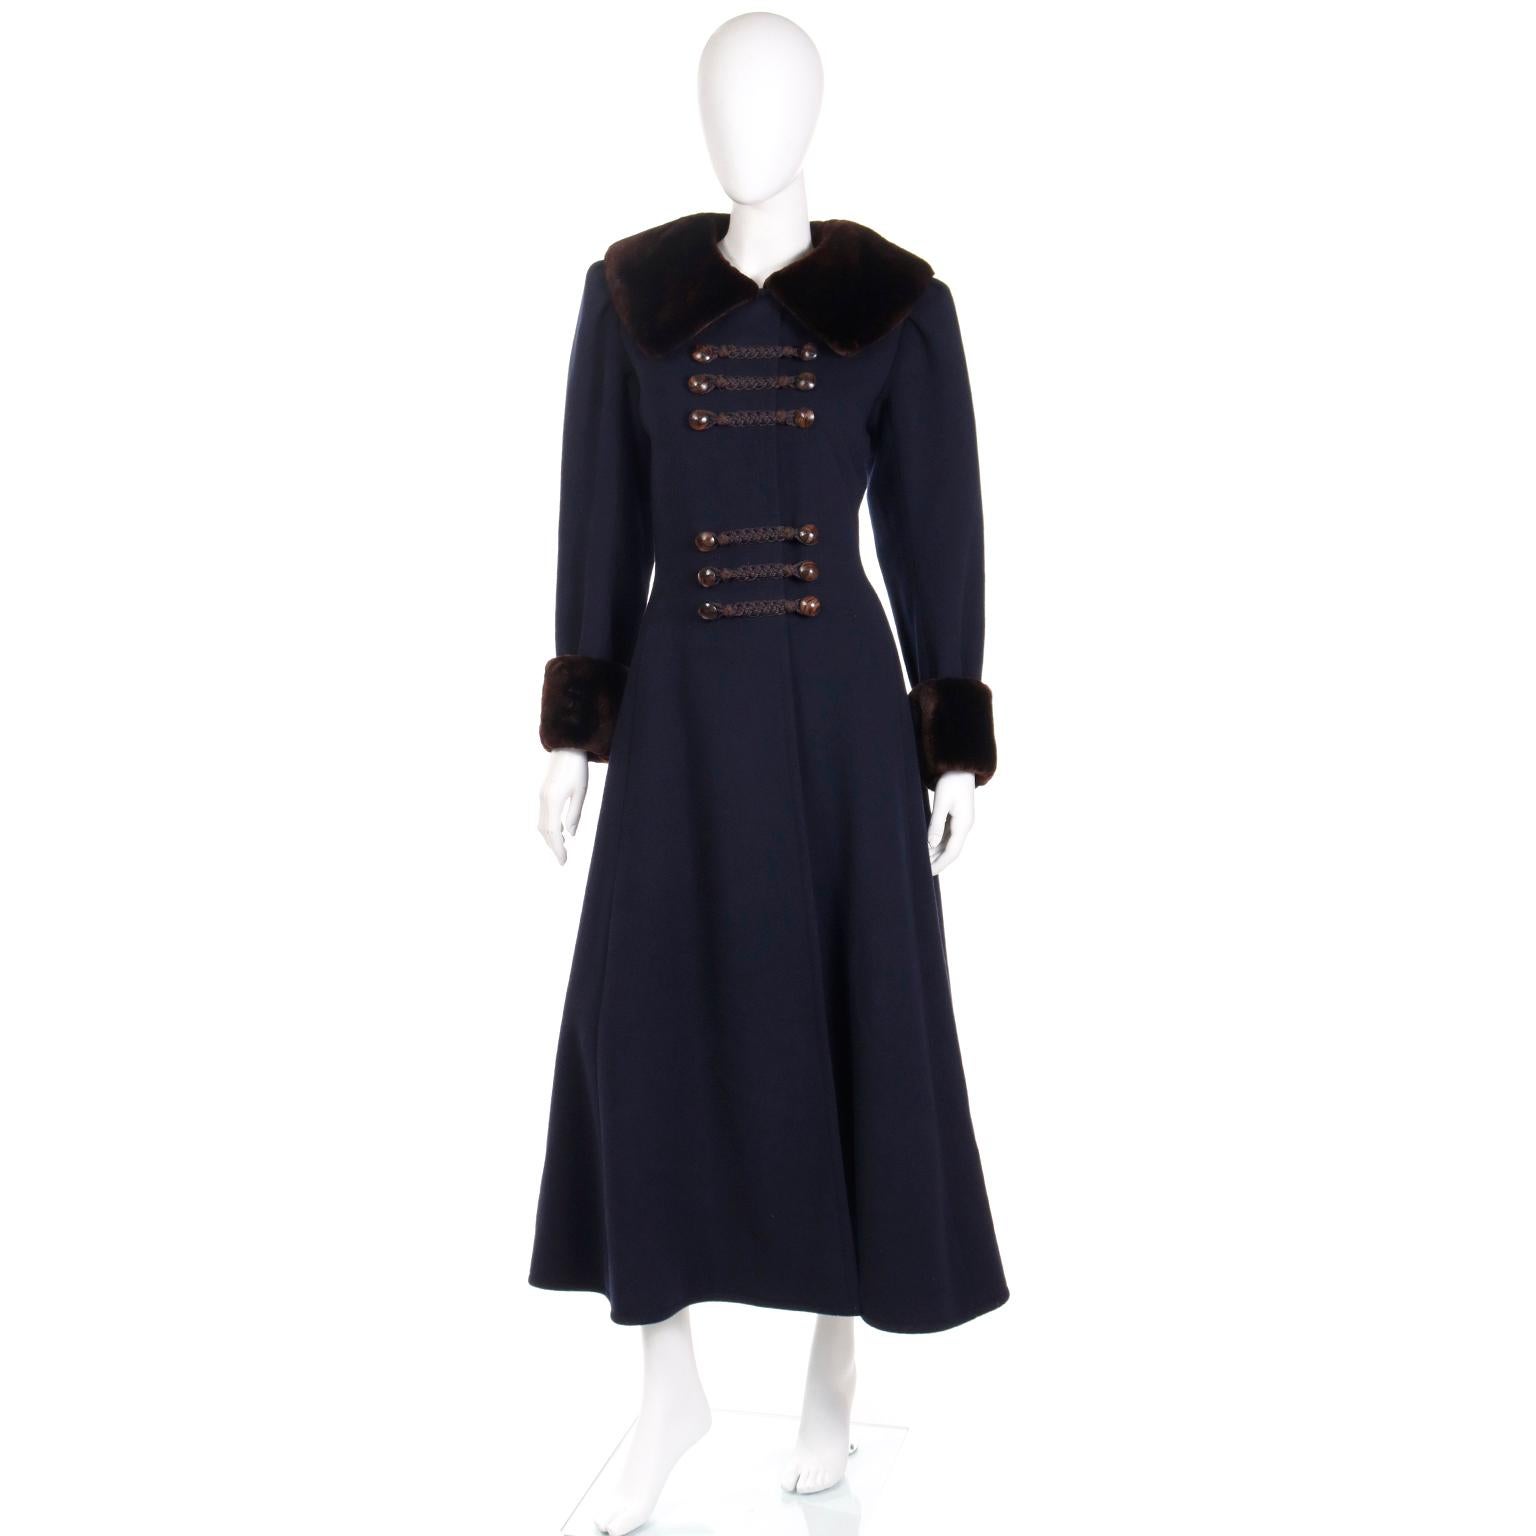 Anyone who knows and loves vintage Yves Saint Laurent fashion will be obsessed with this Haute Couture Fall/Winter 1976 / 77 Cossack style navy blue wool coat with chocolate brown sheared mink trim. This truly iconic coat is a rare, collectible